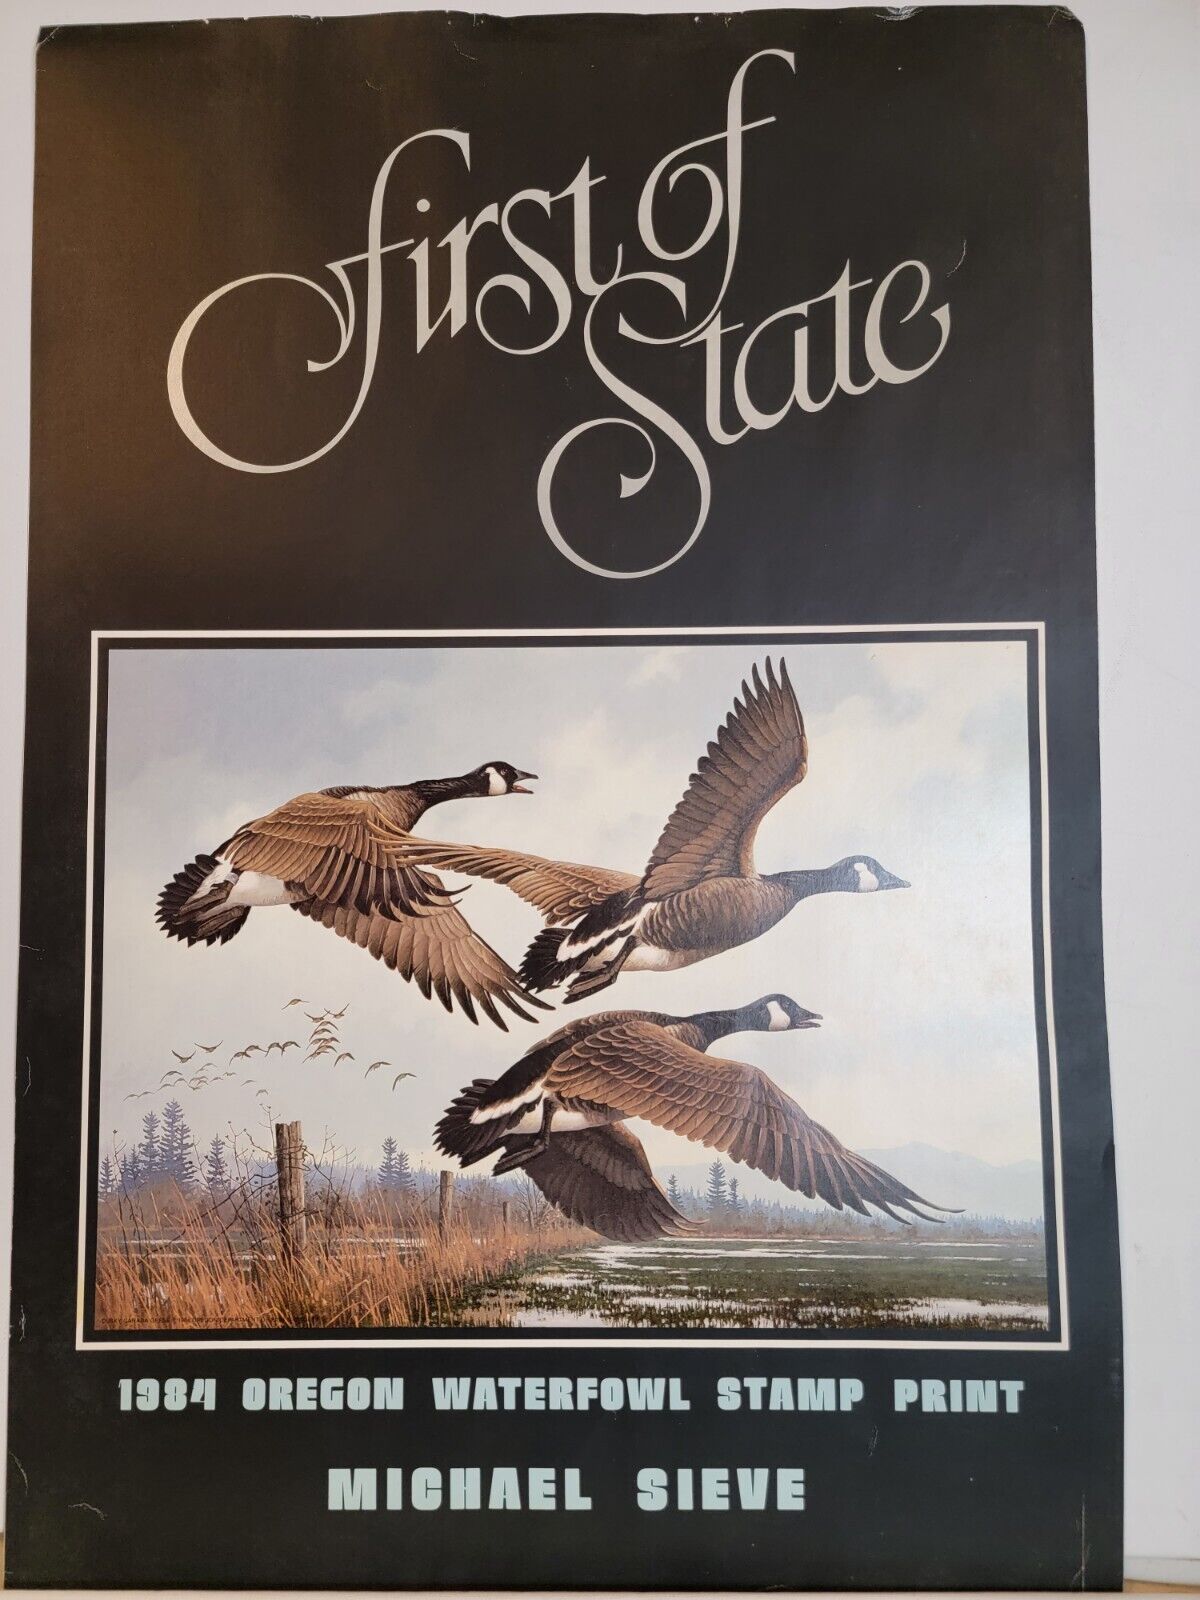 Vintage First of The State 1984 Oregon Waterfowl Stamp Print Proof Stamp Poster